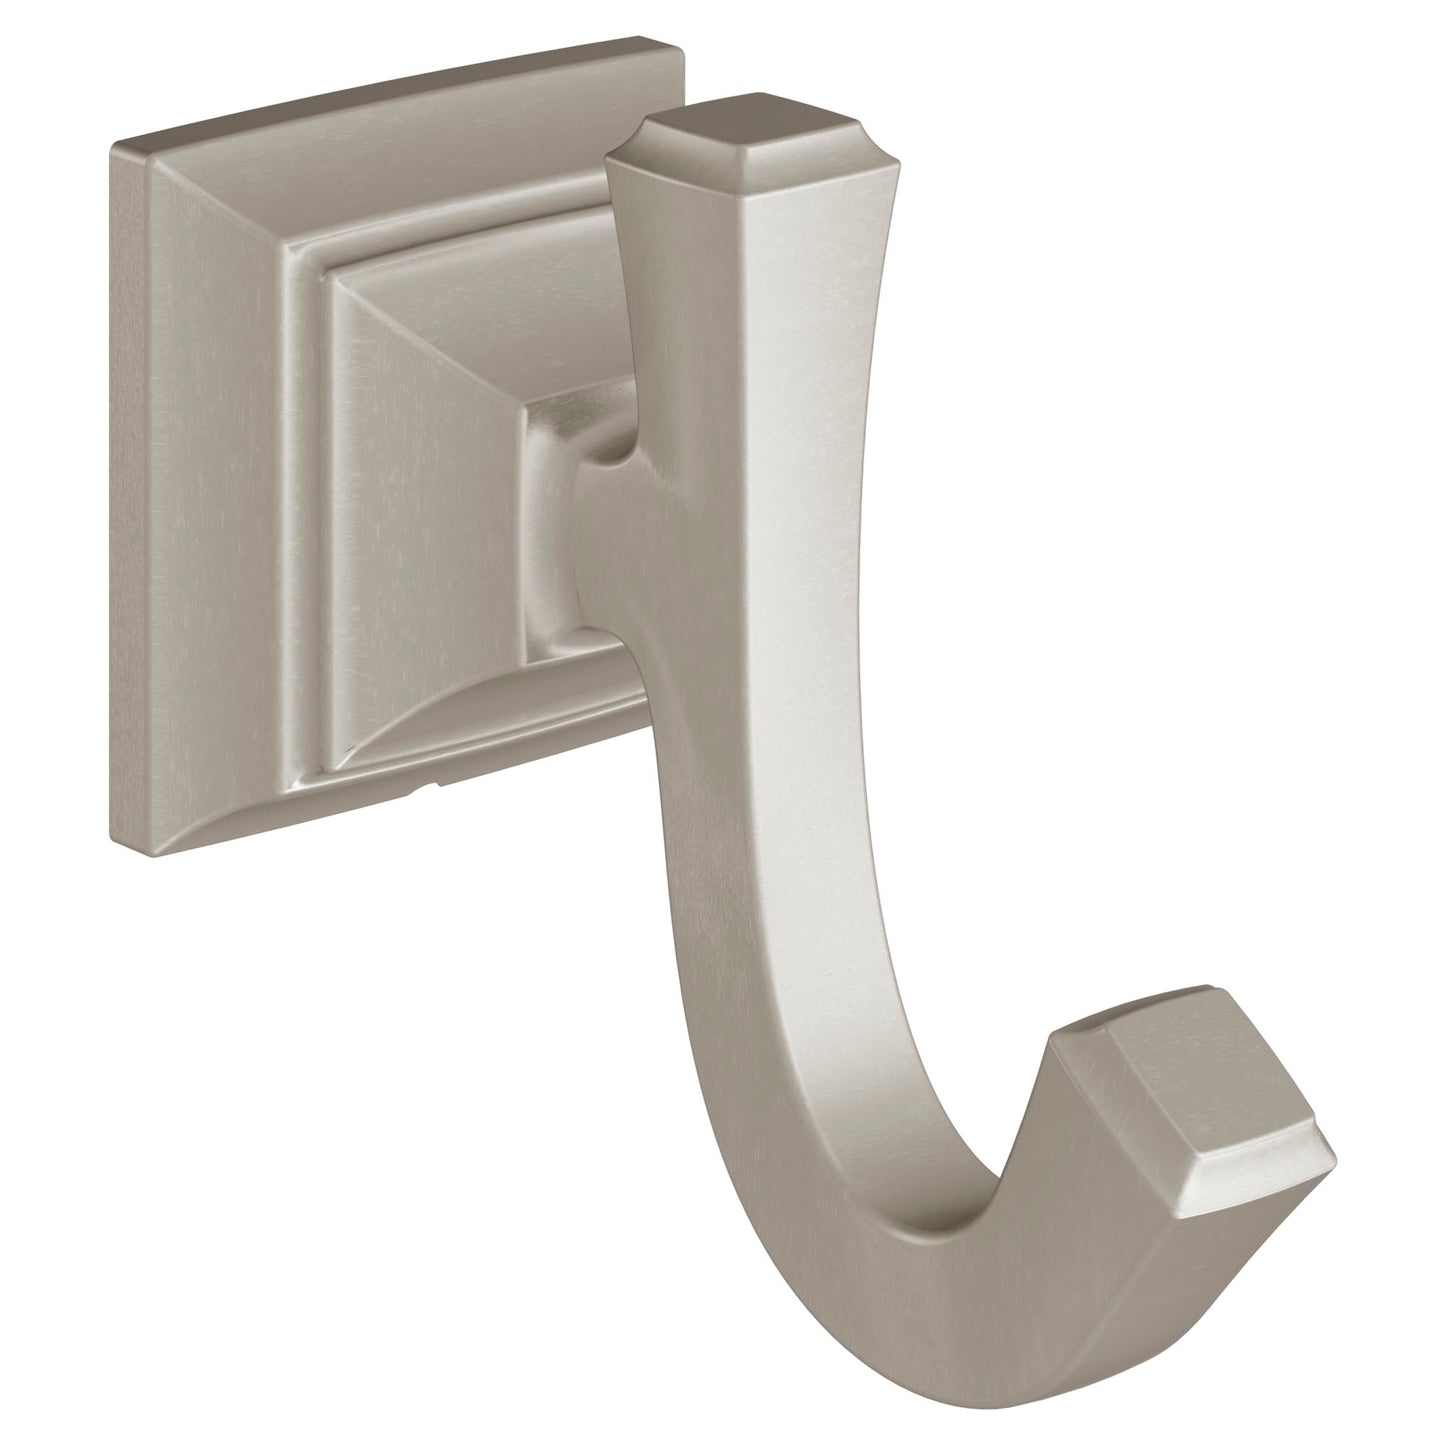 AMERICAN-STANDARD 7455210.295, Town Square S Double Robe Hook in Brushed Nickel